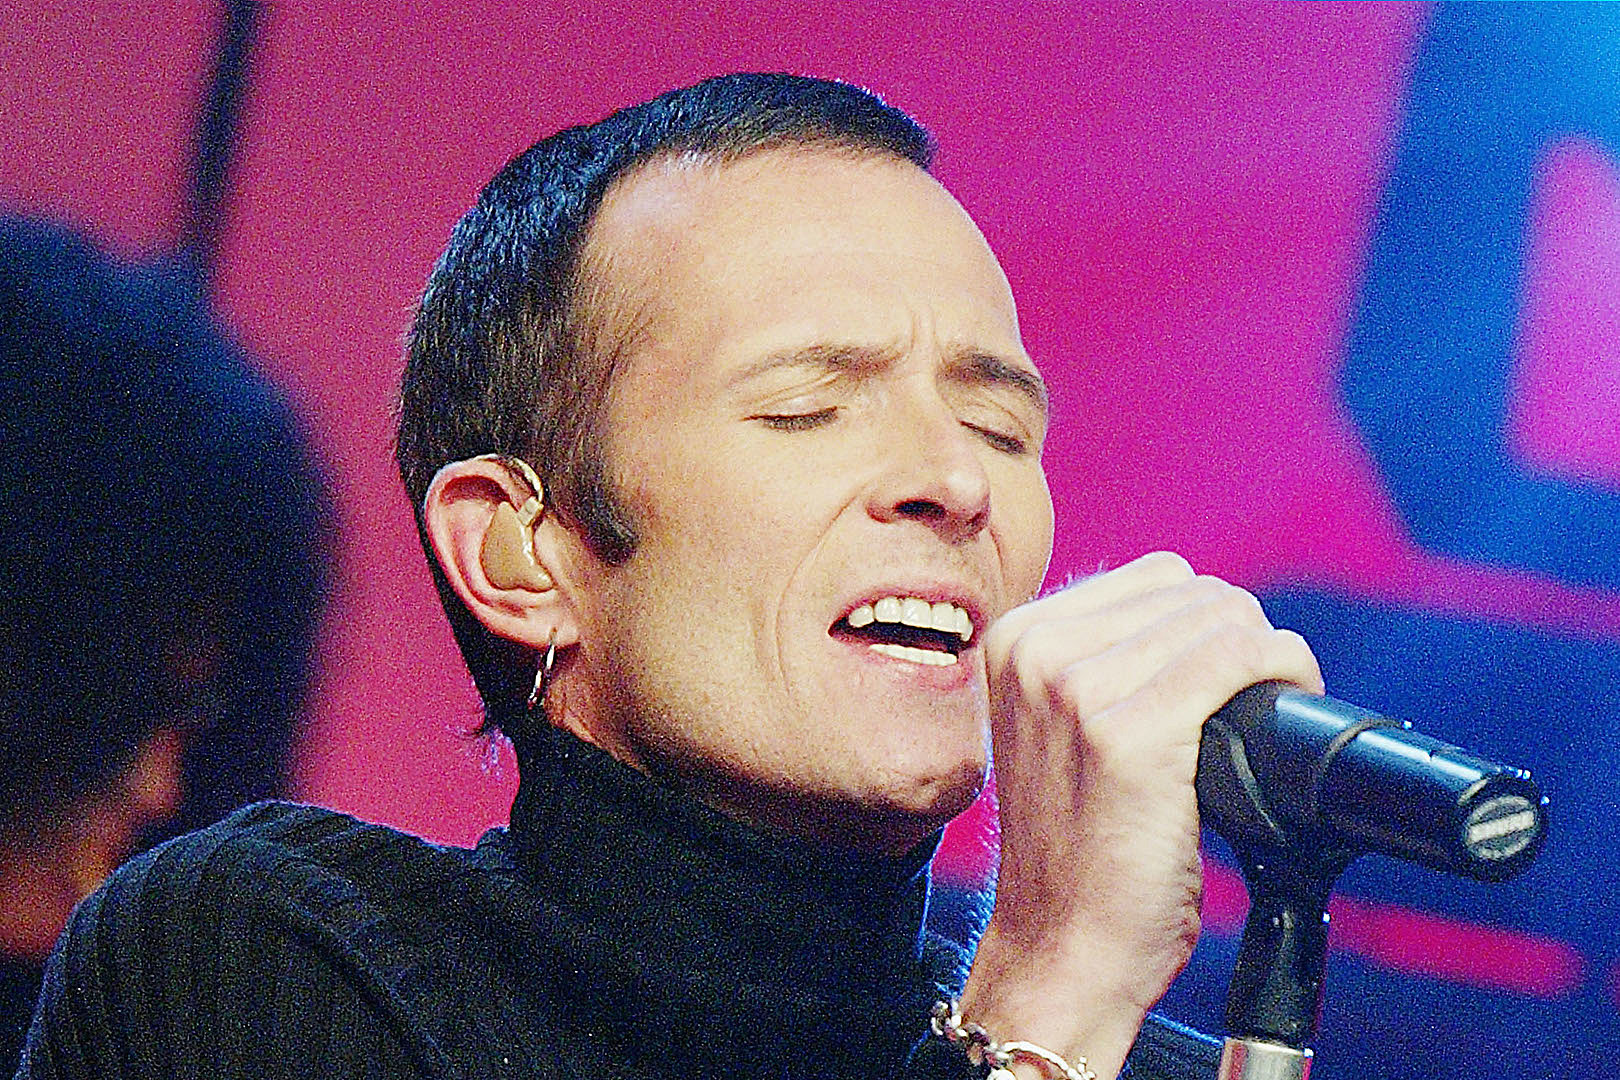 Watch Scott Weiland Sing ‘Have Yourself a Merry Little Christmas’